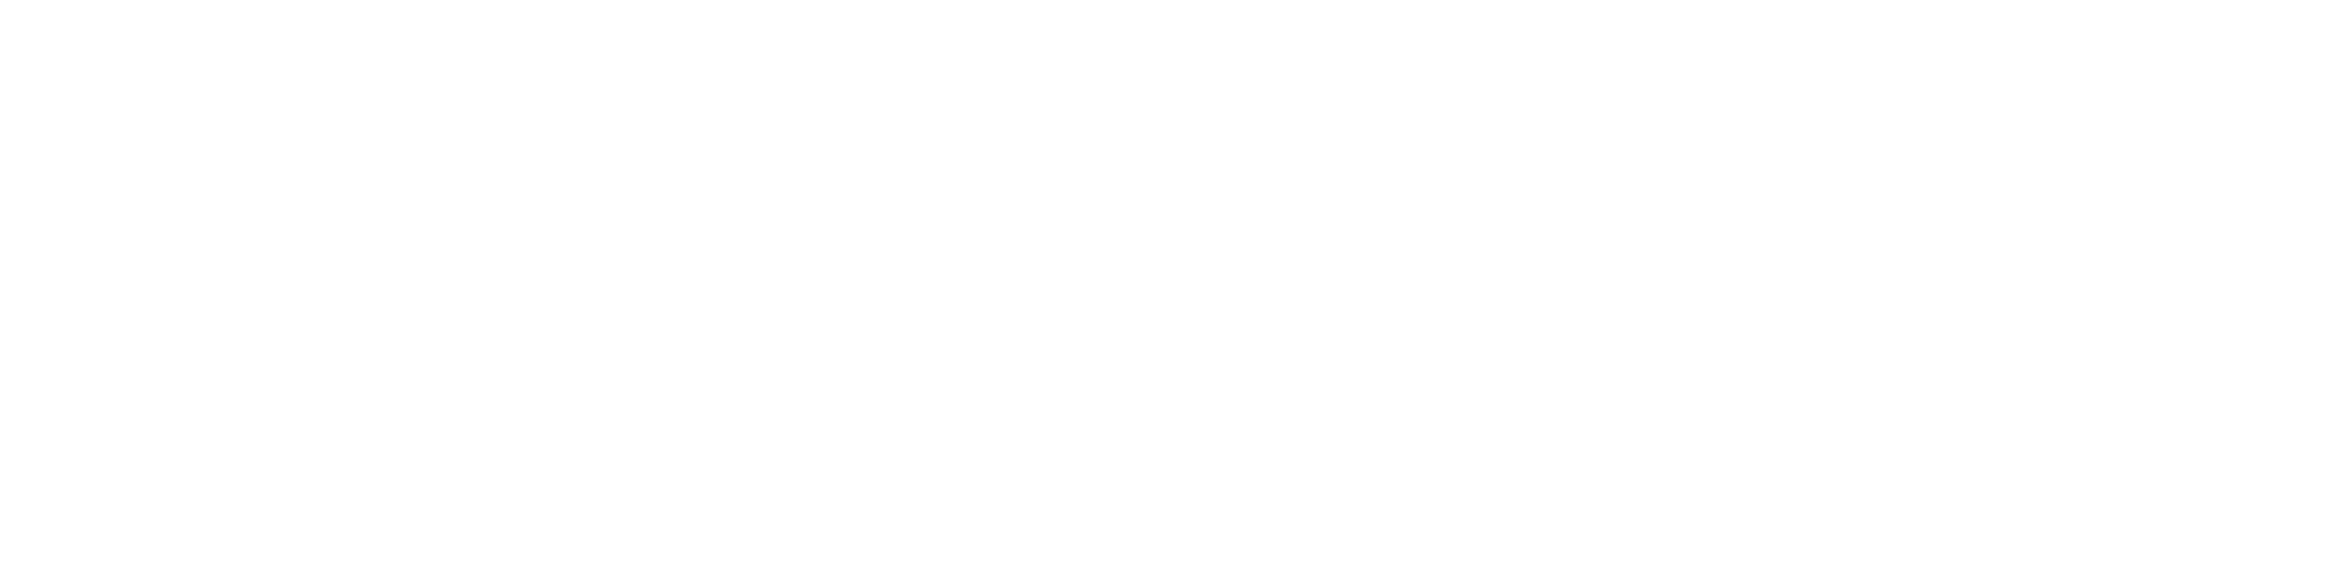 The Battle Plan for Victory logo